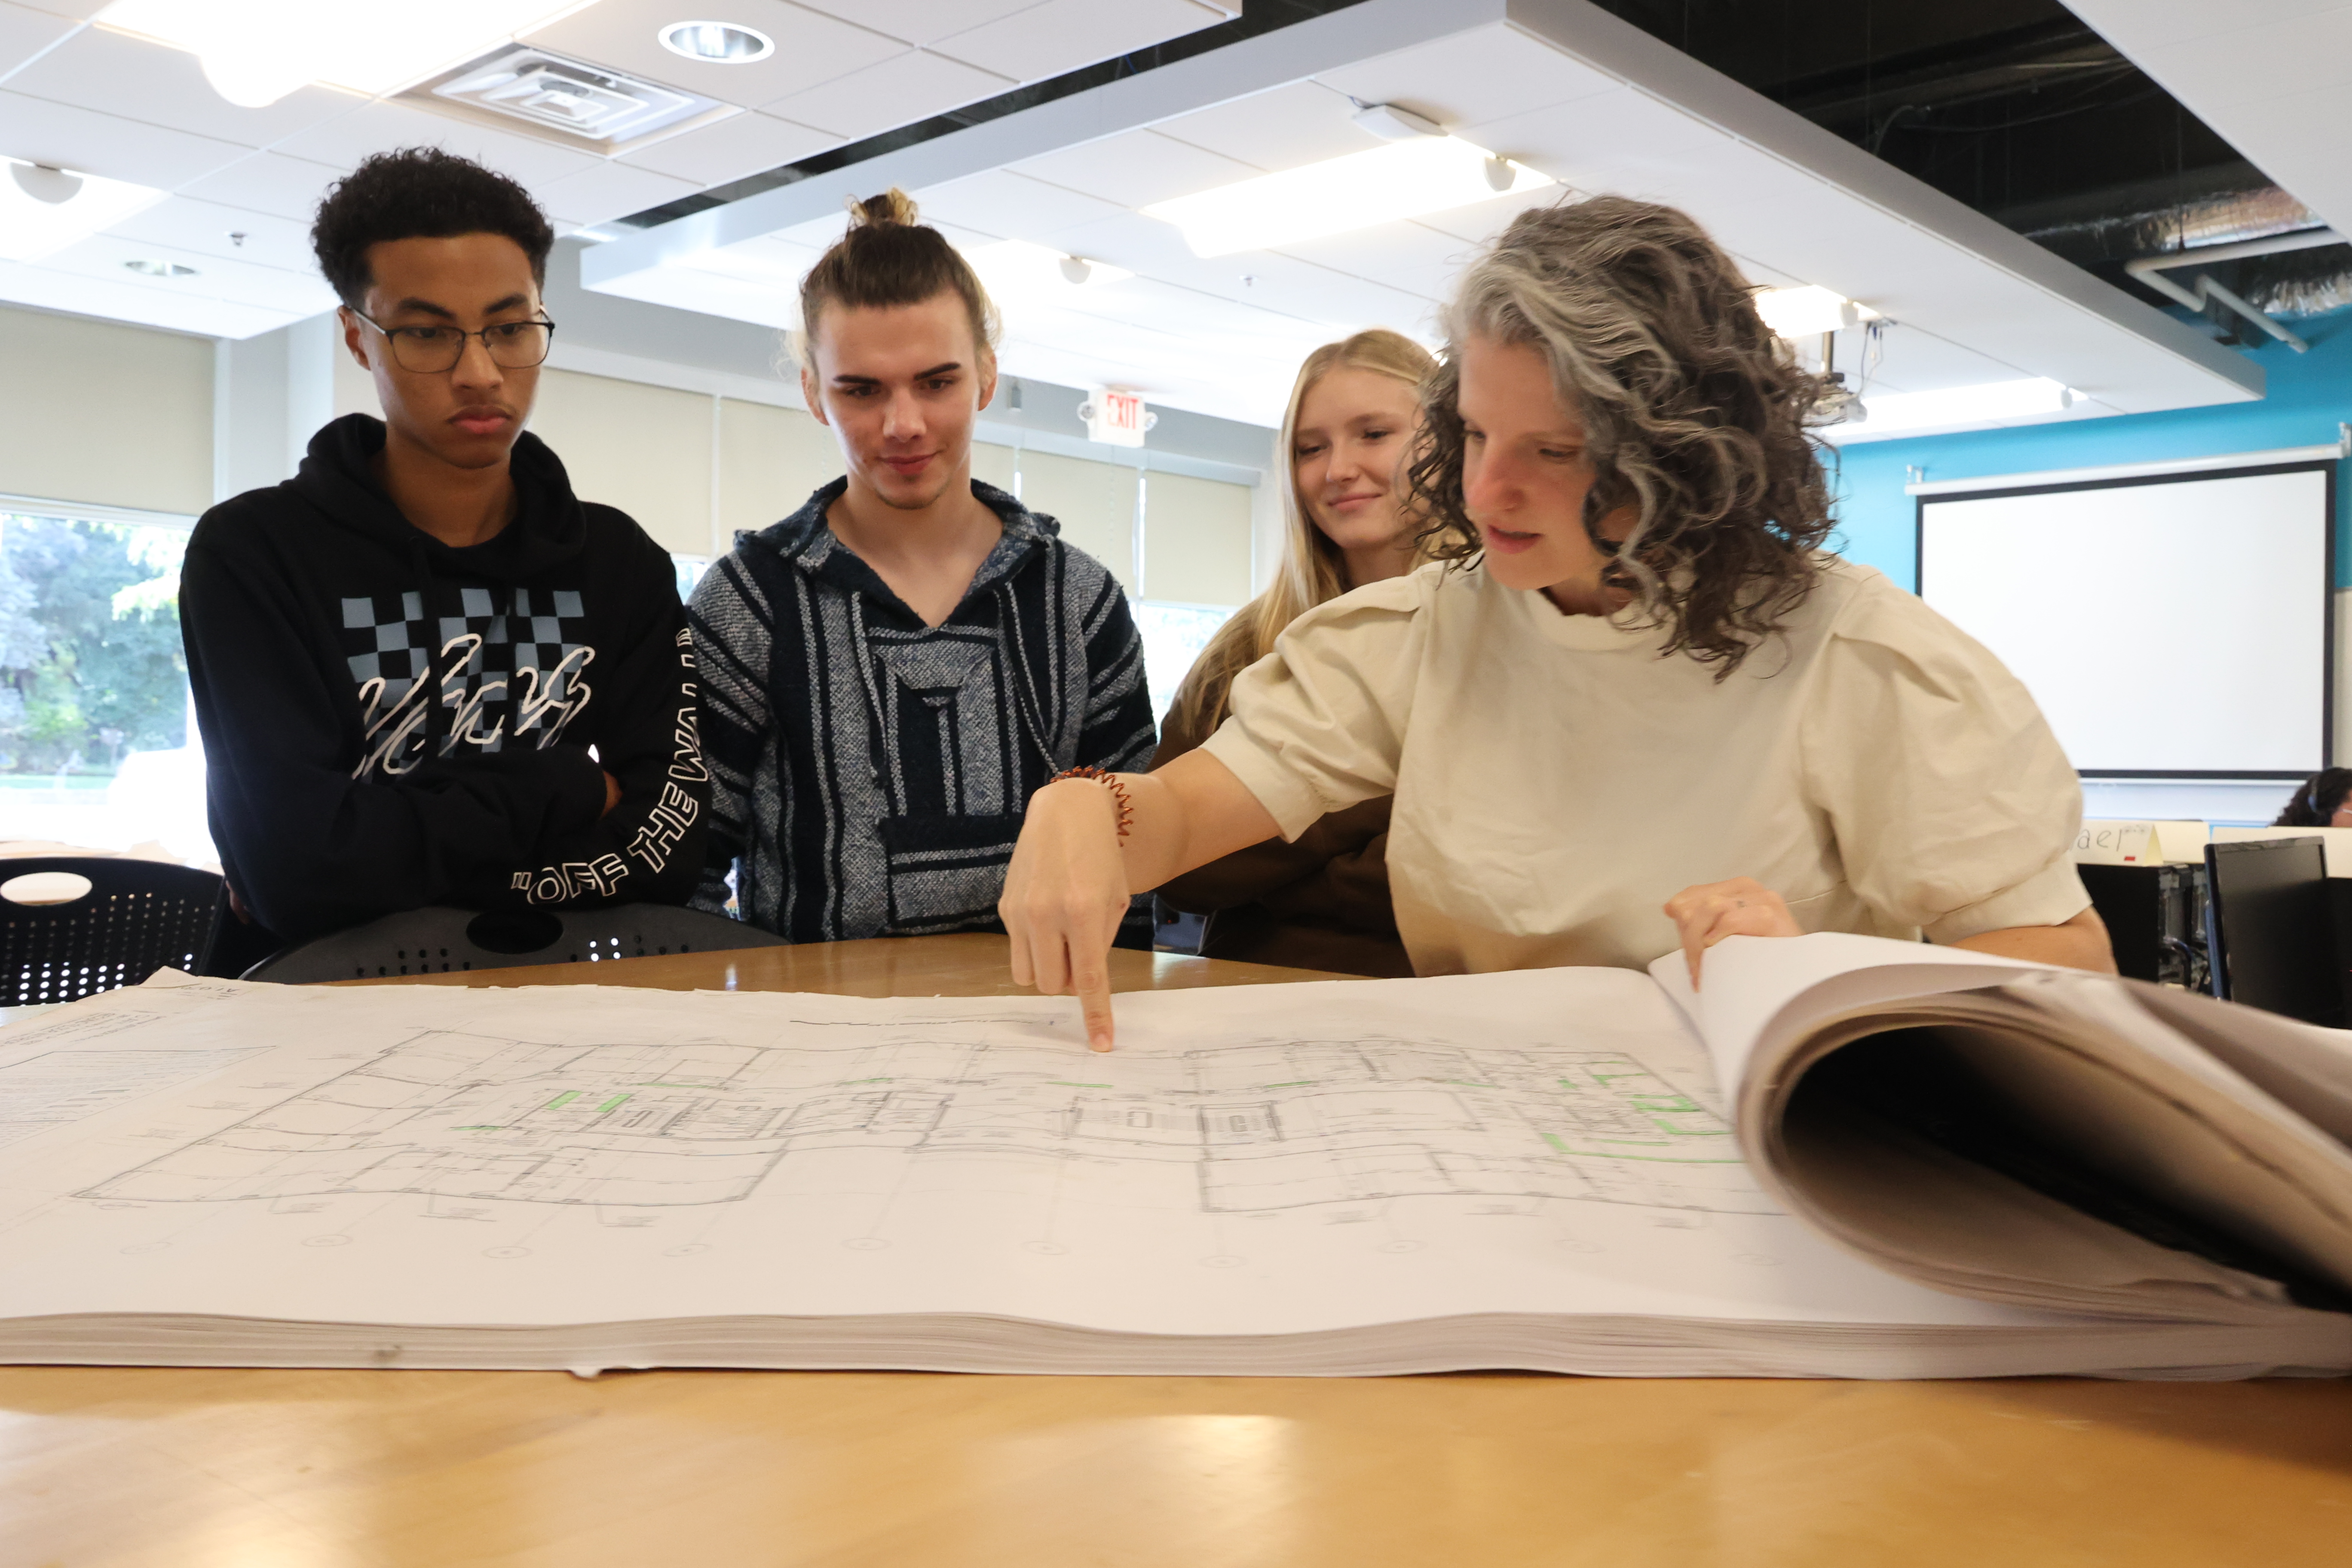 Instructor Amy Smith gathers with three students and is pointing out something on a set of blueprints.